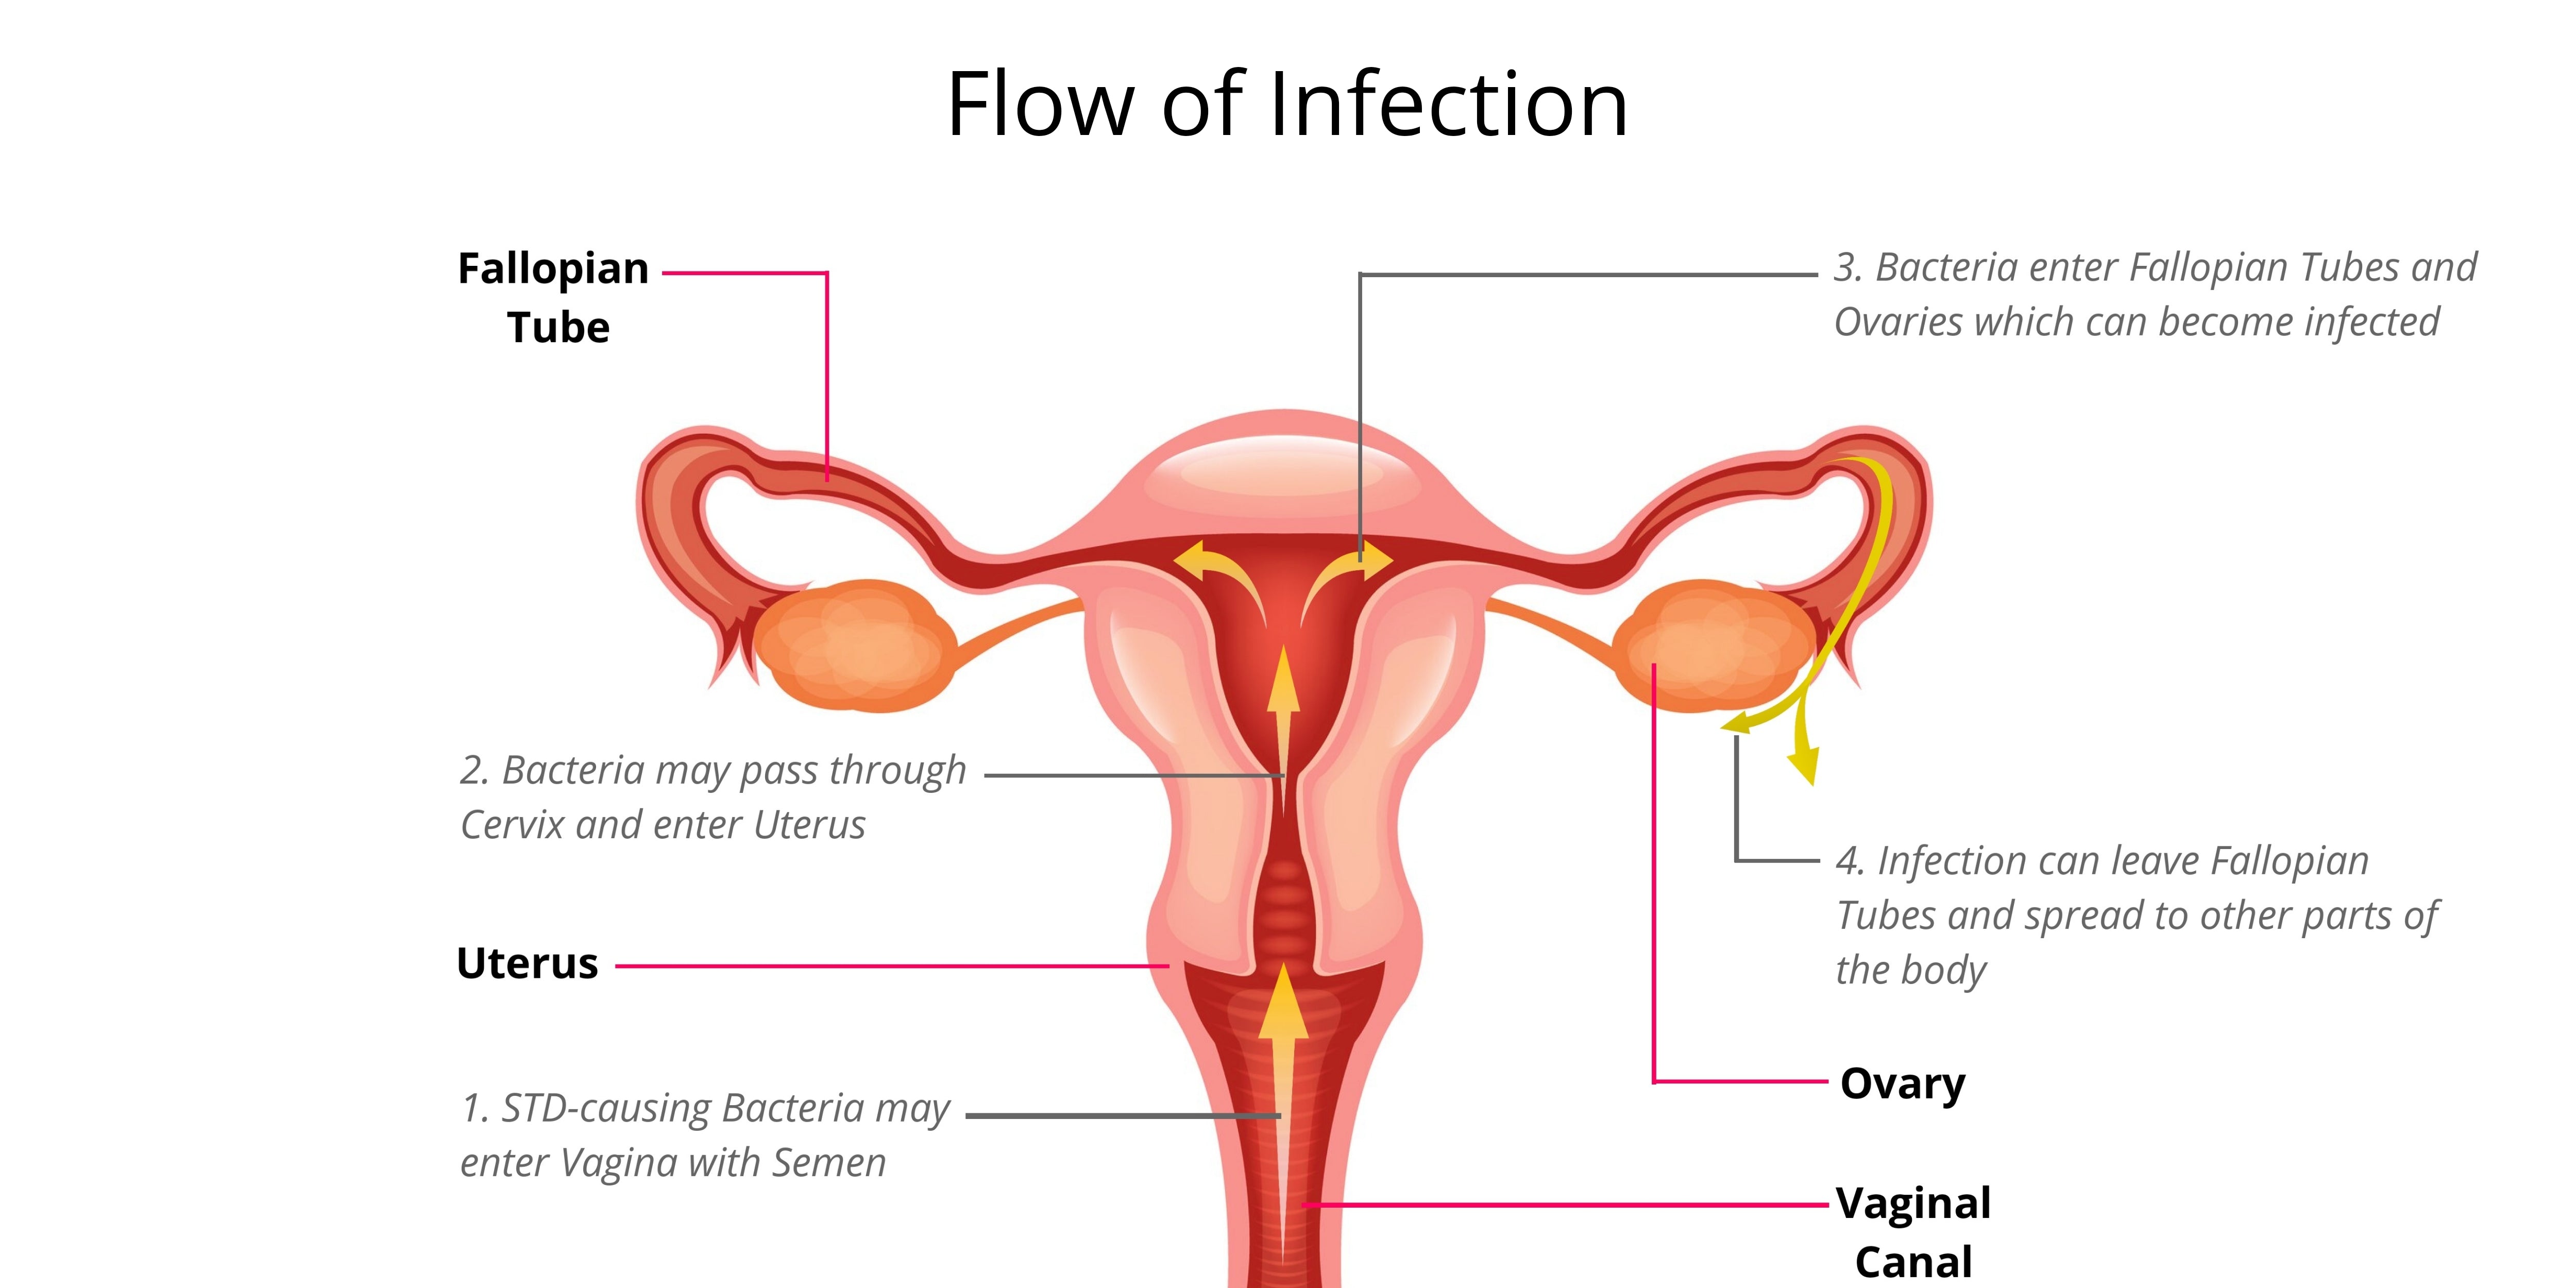 Image shows how PID infection flows and spreads in a female reproductive system.